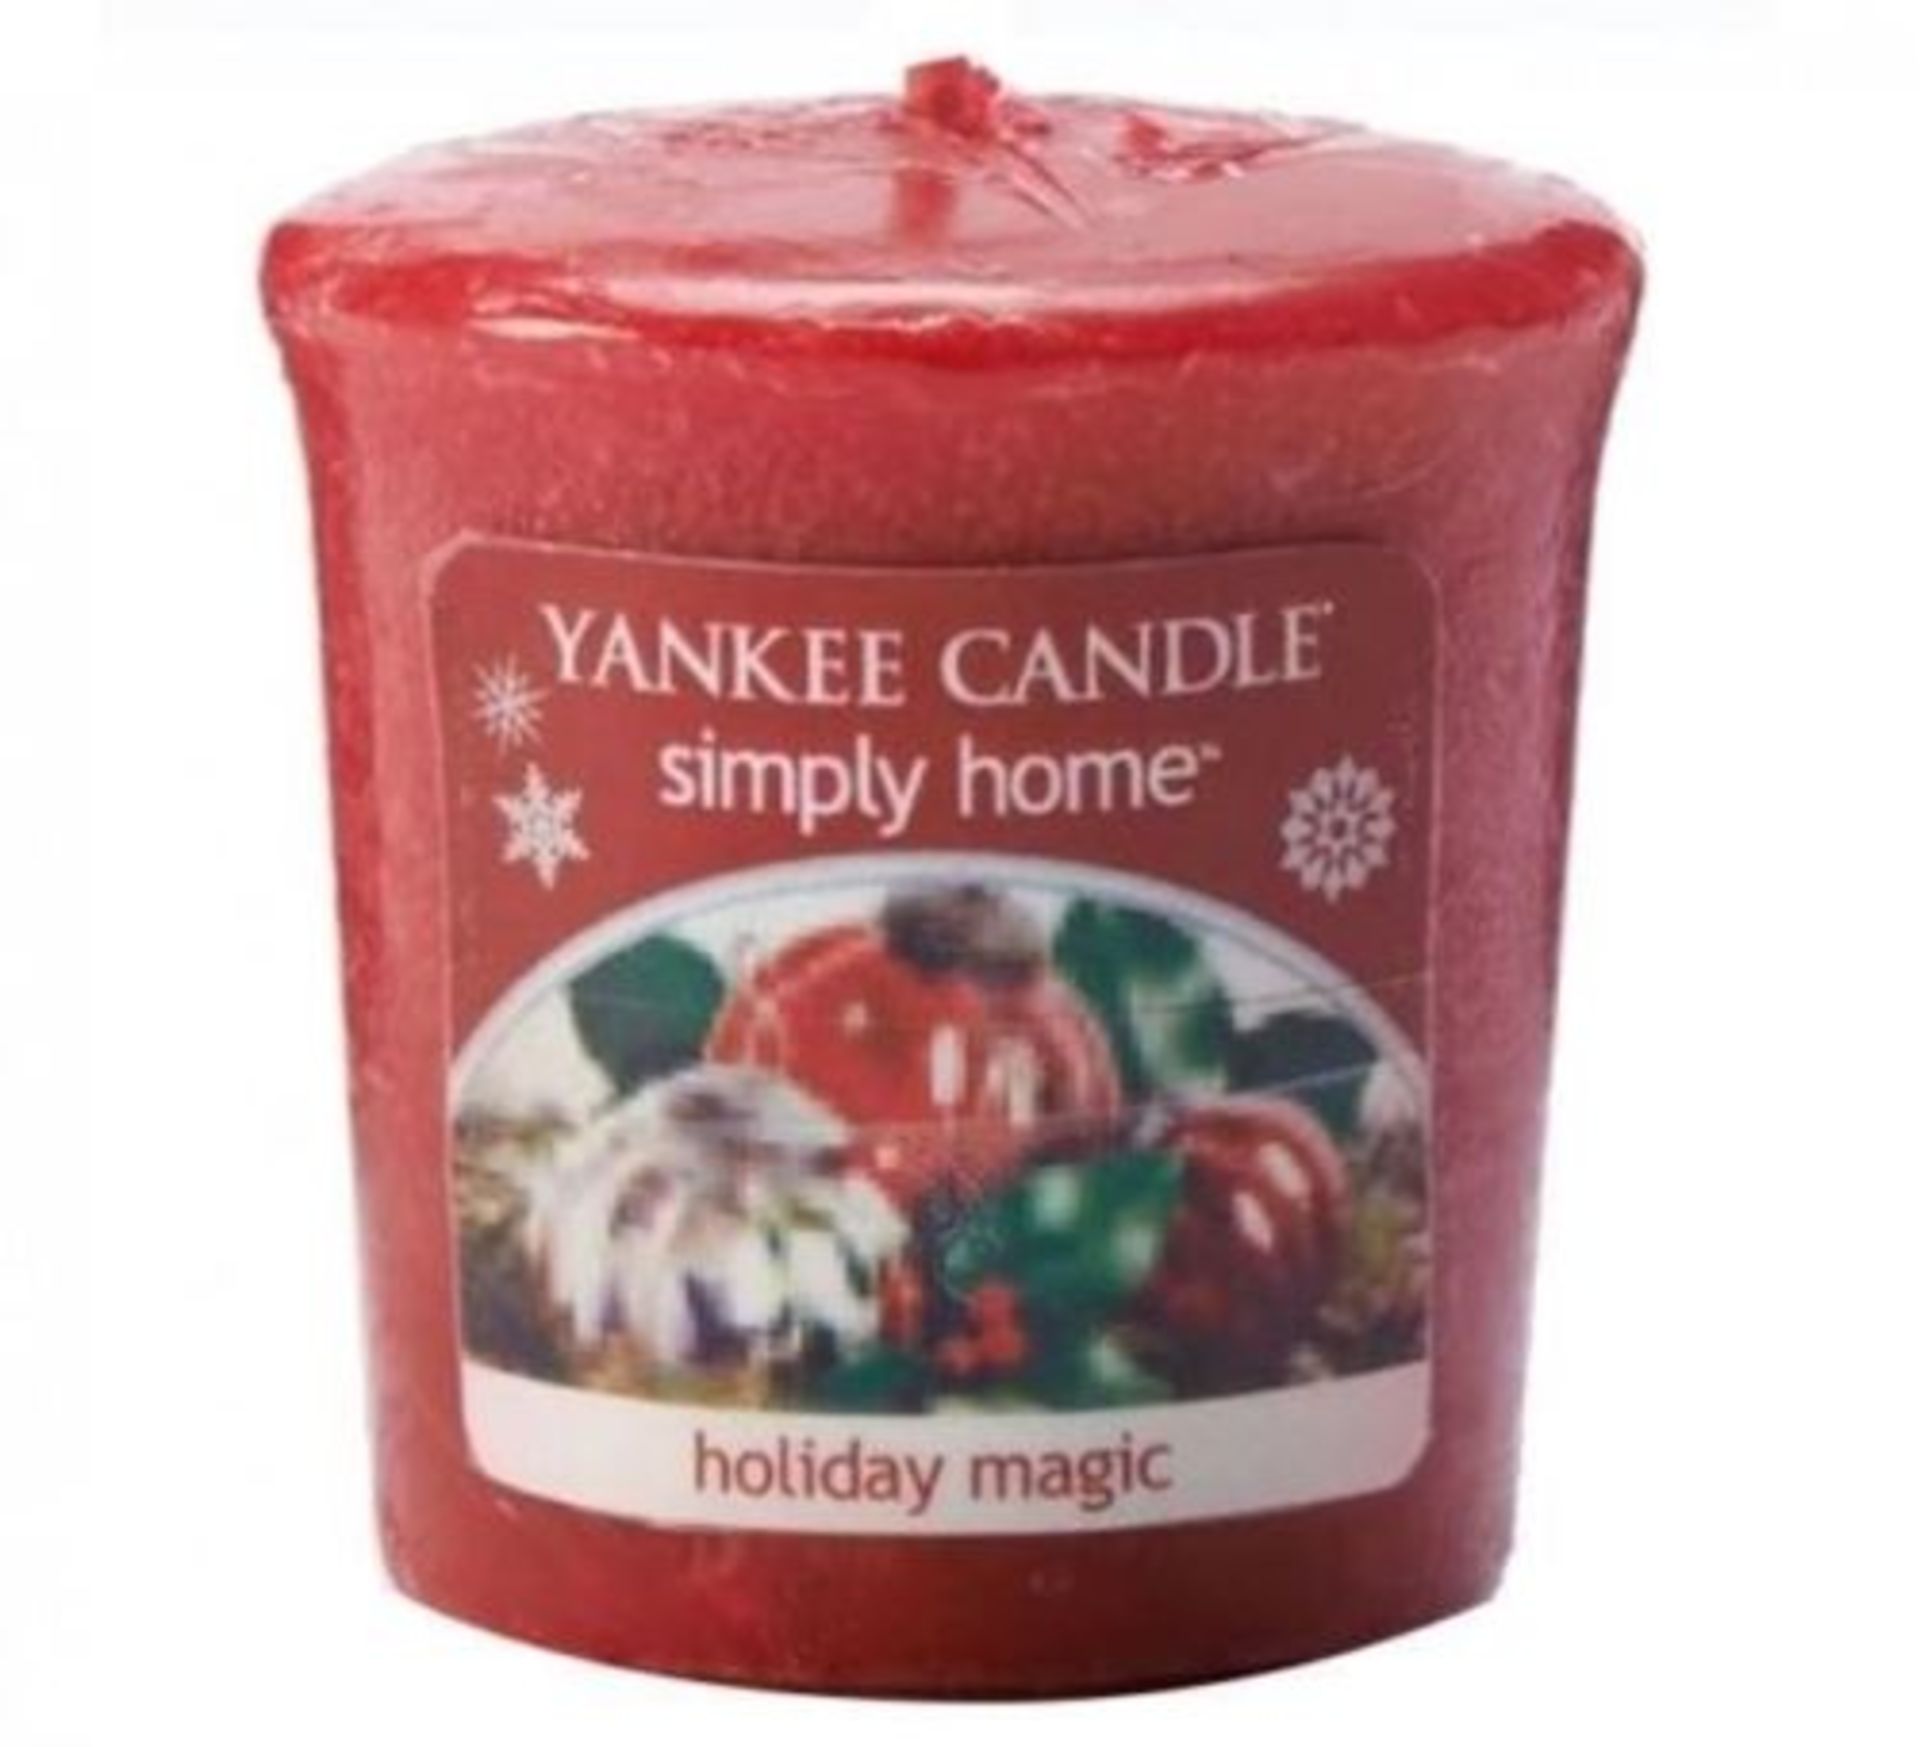 V Brand New 18 x Yankee Candle Votive Holiday Magic 49g eBay Price £22.99 X 2 YOUR BID PRICE TO BE - Image 2 of 2